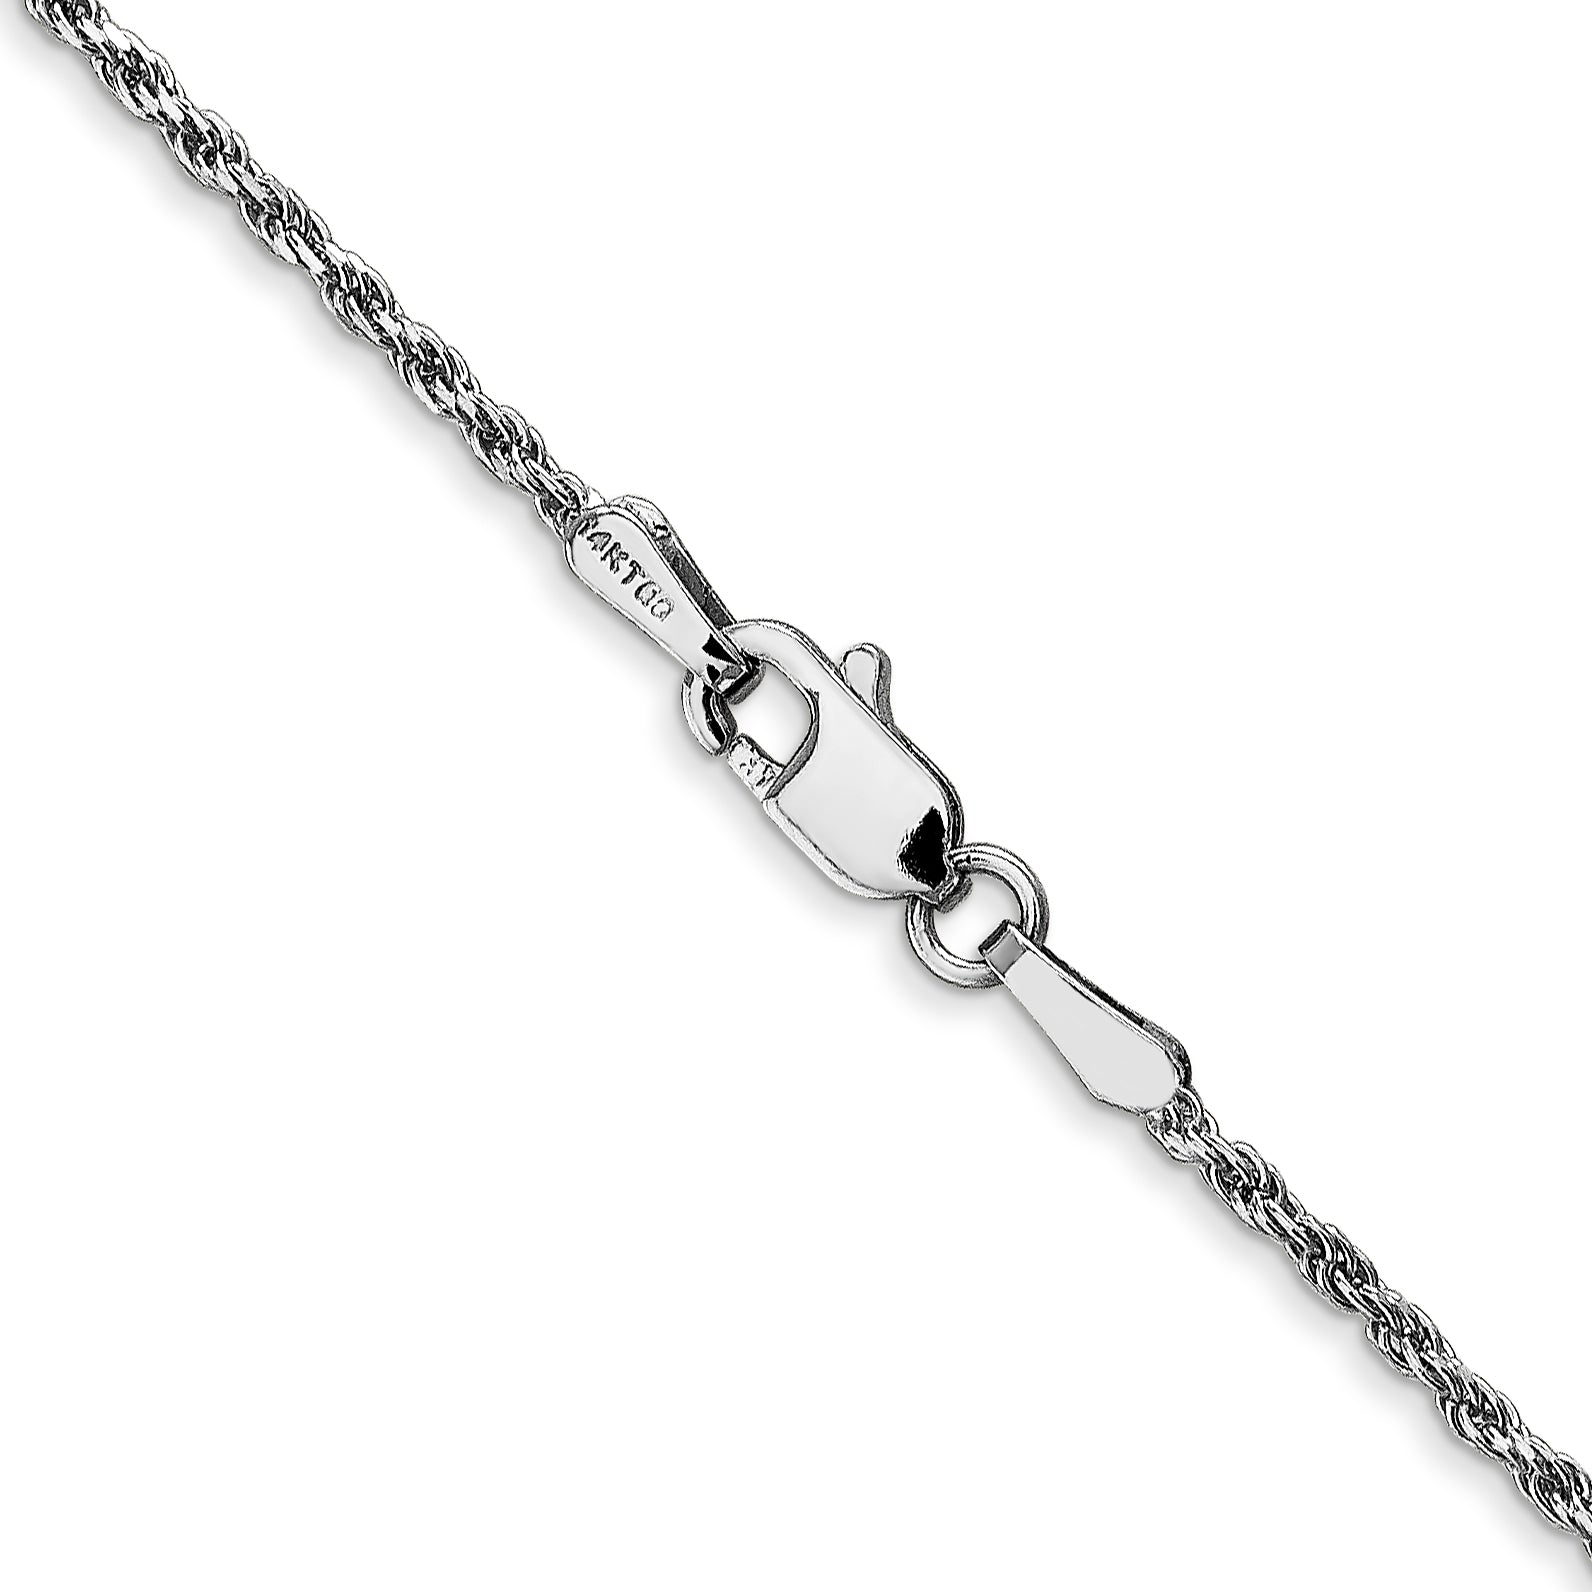 14K White Gold 14 inch 1.3mm Diamond-cut Machine Made Rope with Lobster Clasp Chain Chain